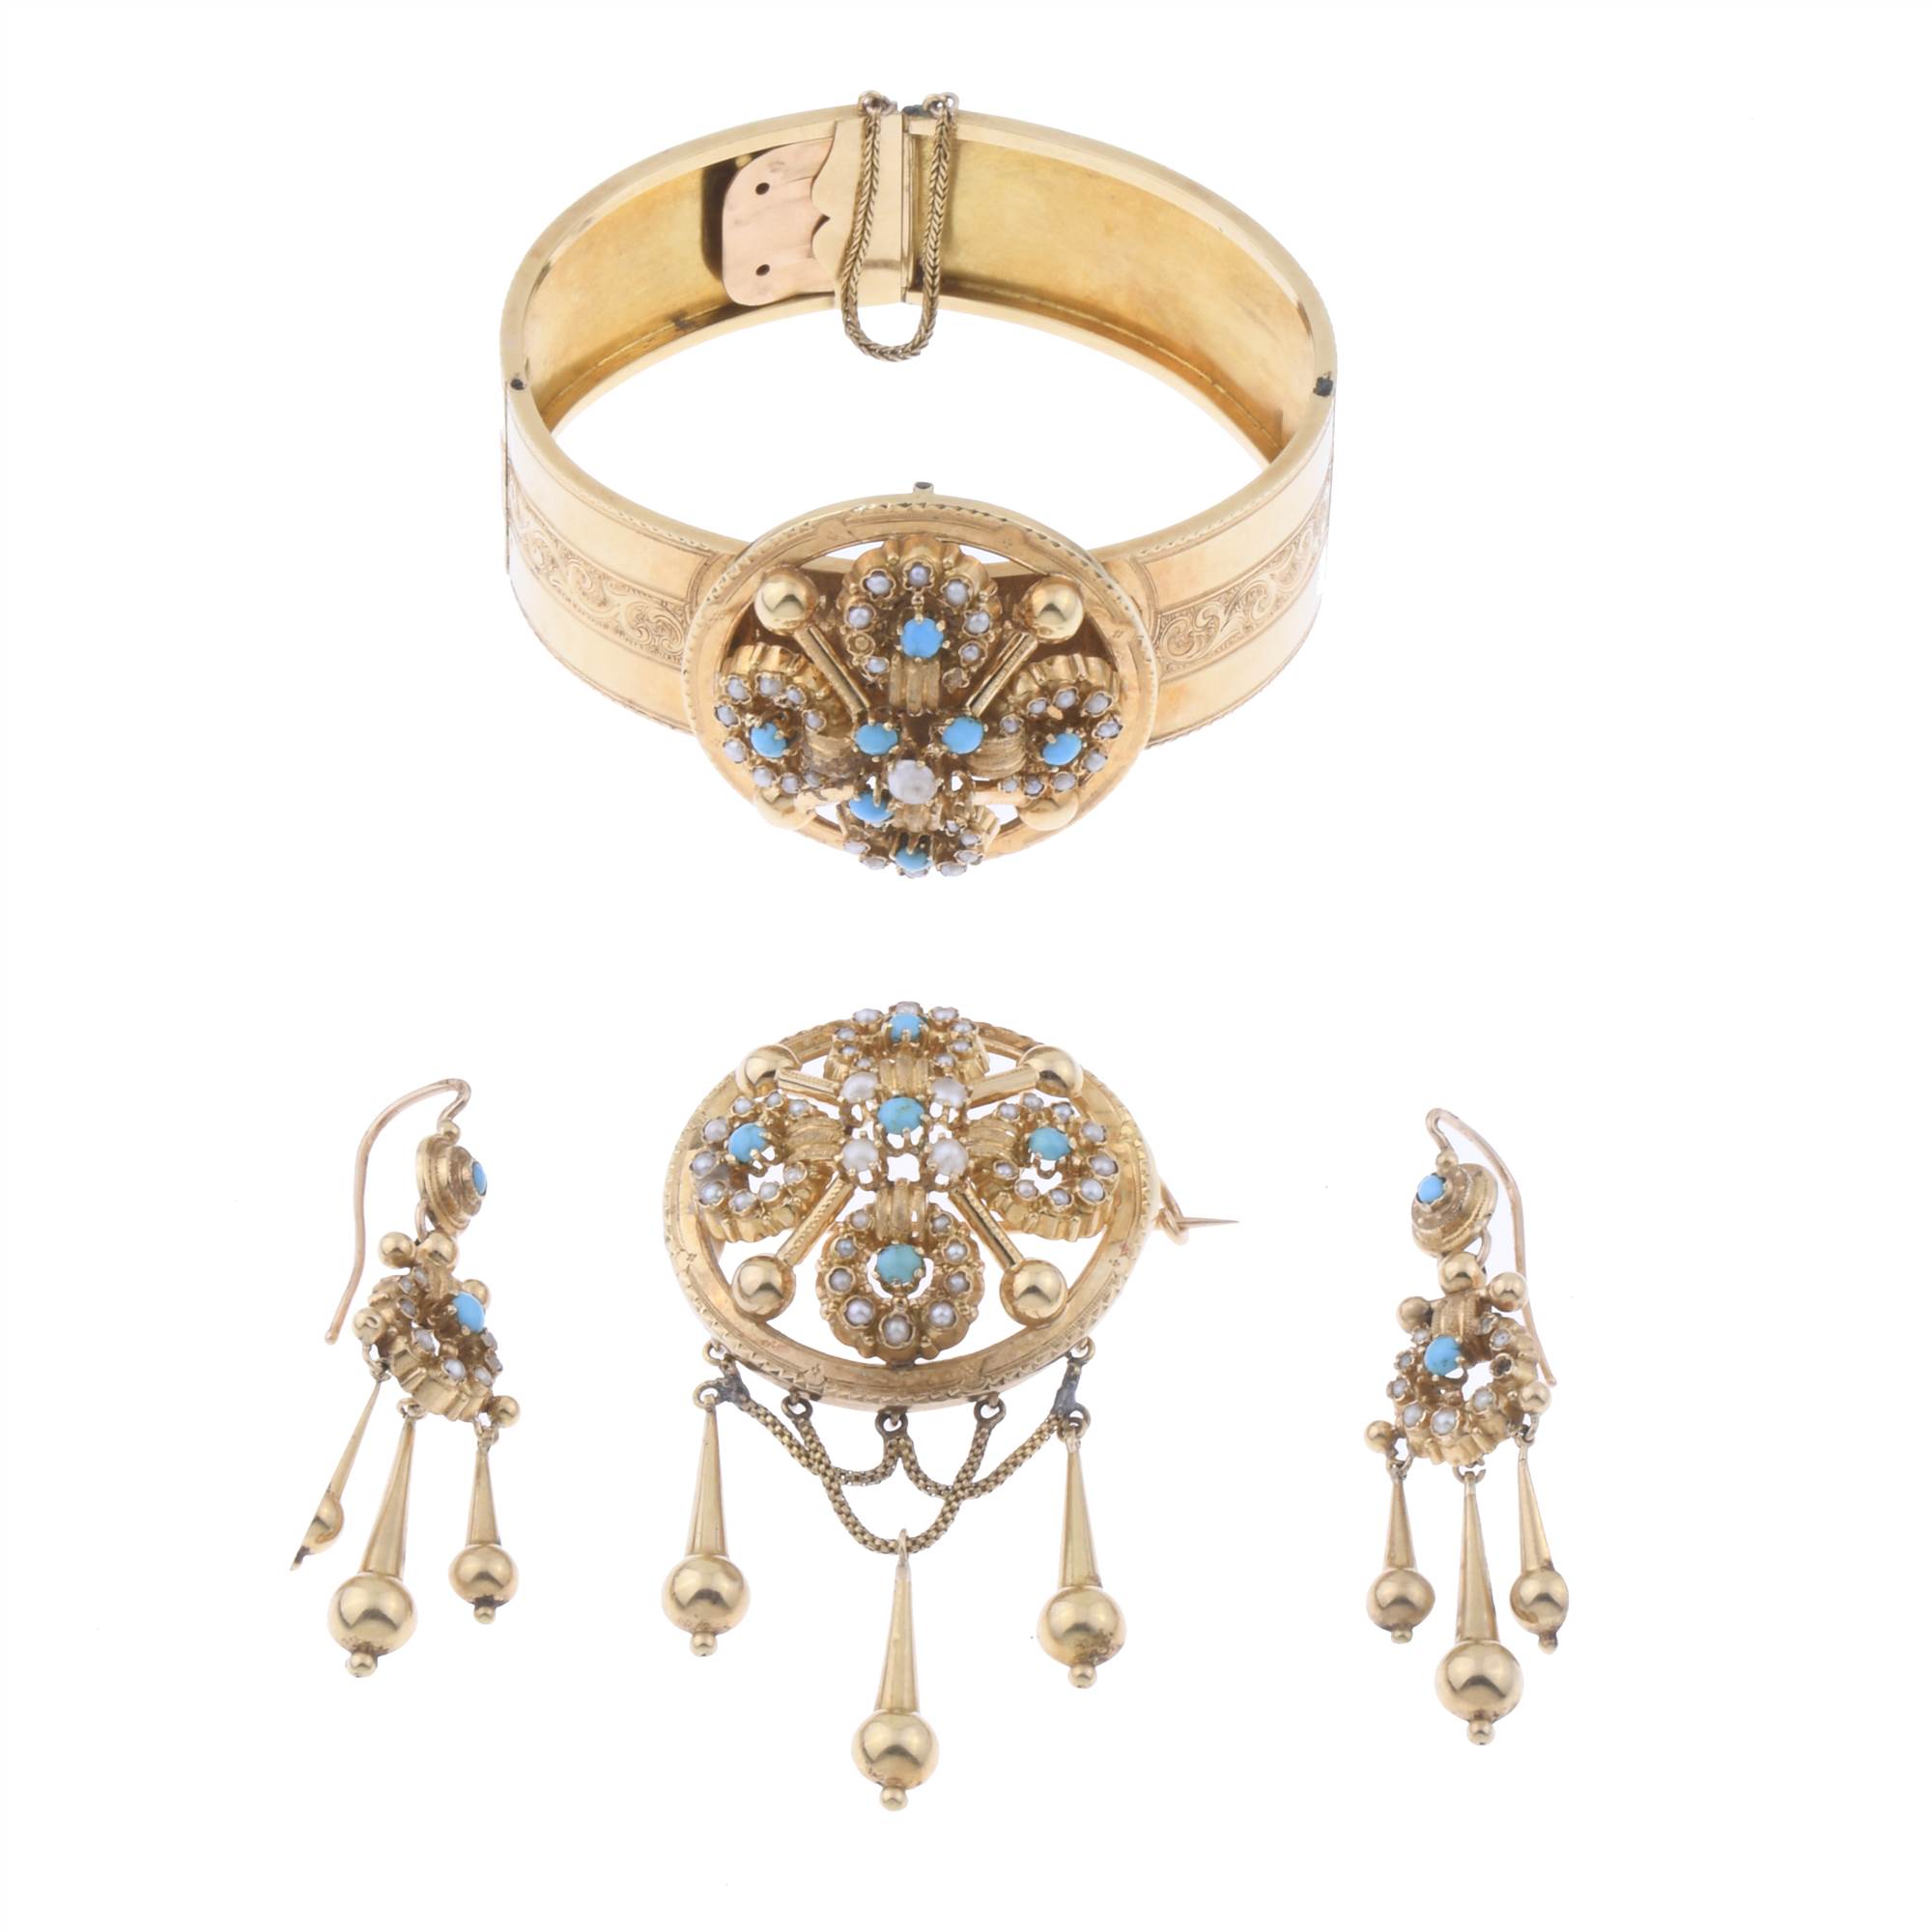 ALPHONSINE SET IN YELLOW GOLD WITH PEARLS AND TURQUOISES, L